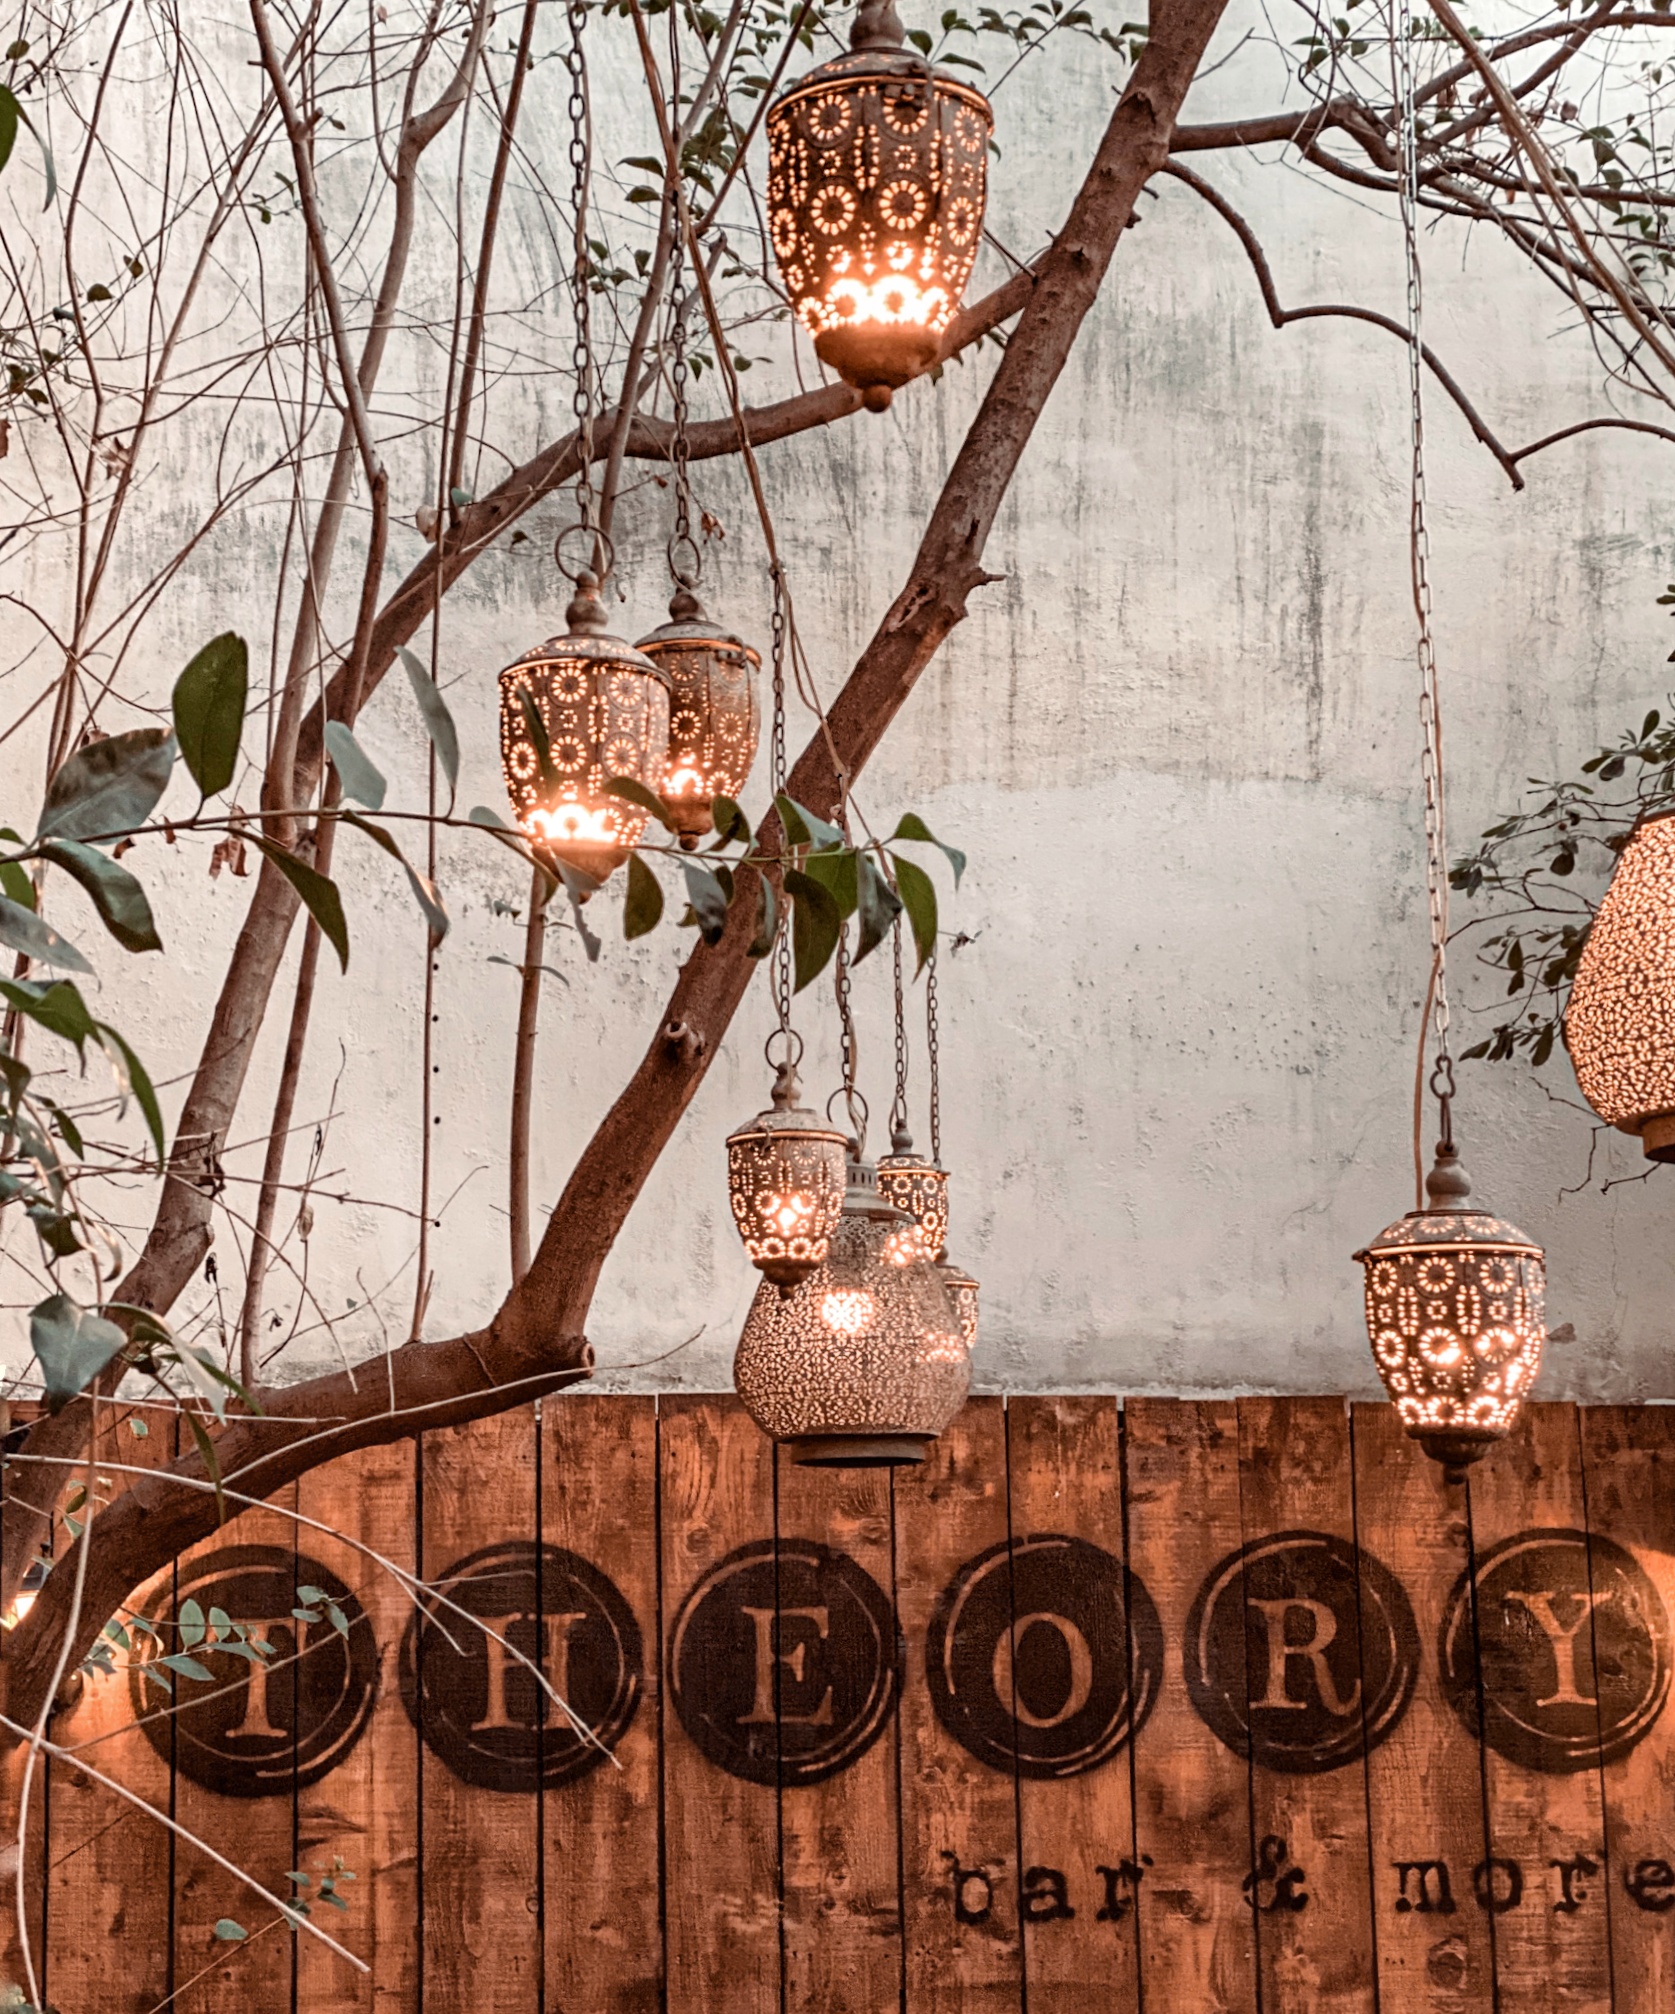 Theory Bar and More, @aboutfood.gr, © Άννα Μαρία Μπαρκονίκου